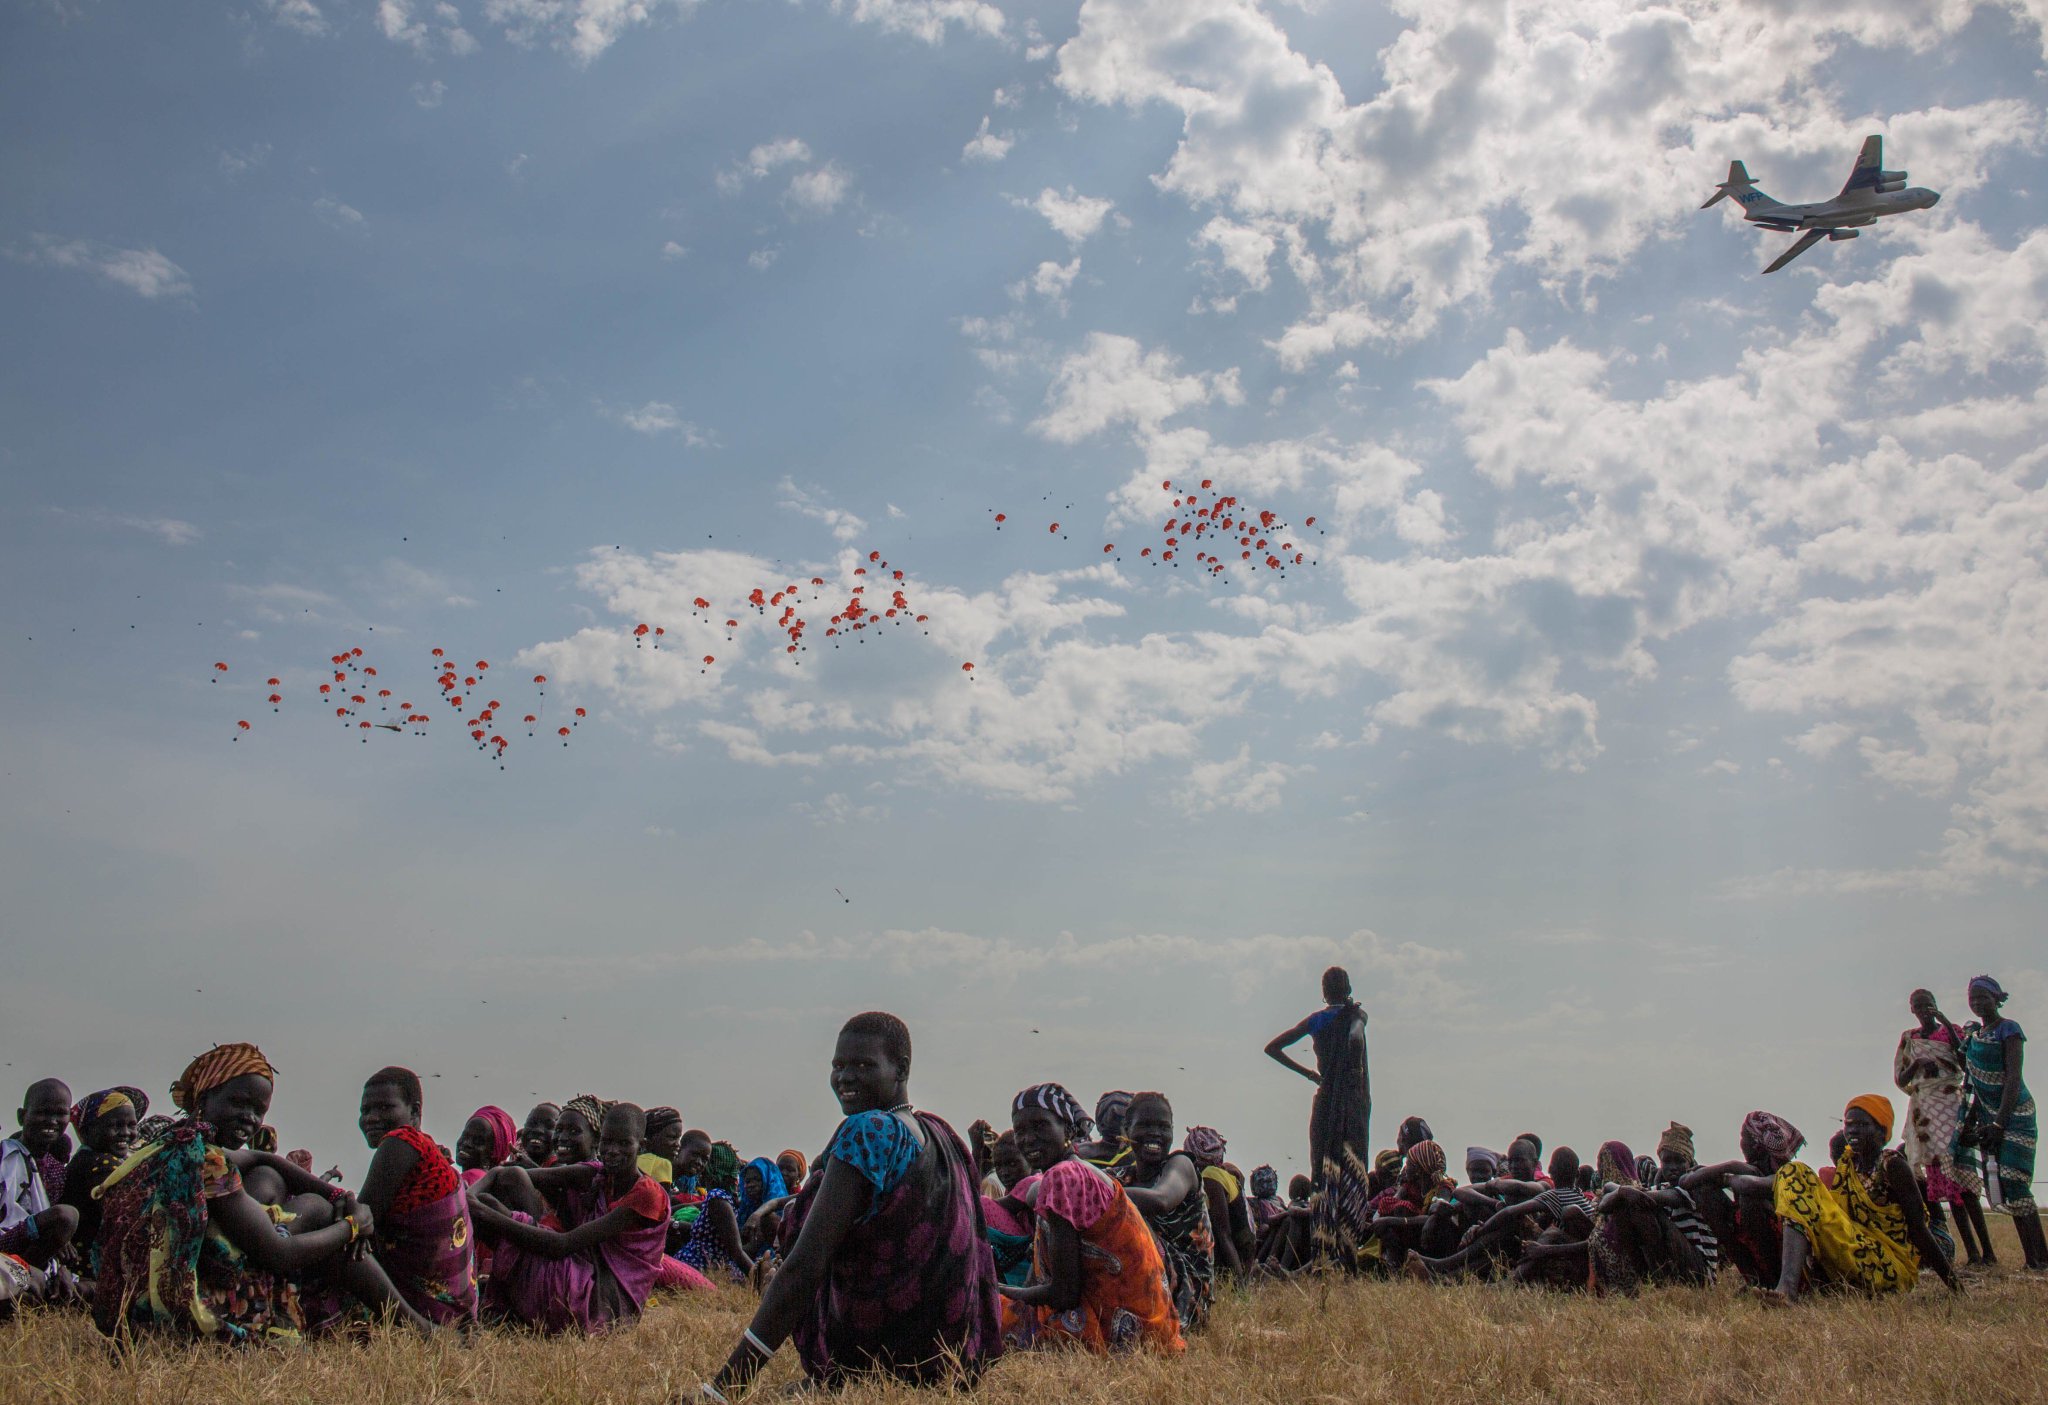 Hundreds of displaced families in Ganyiel, South Sudan await a lifesaving airdrop of food from WFP.